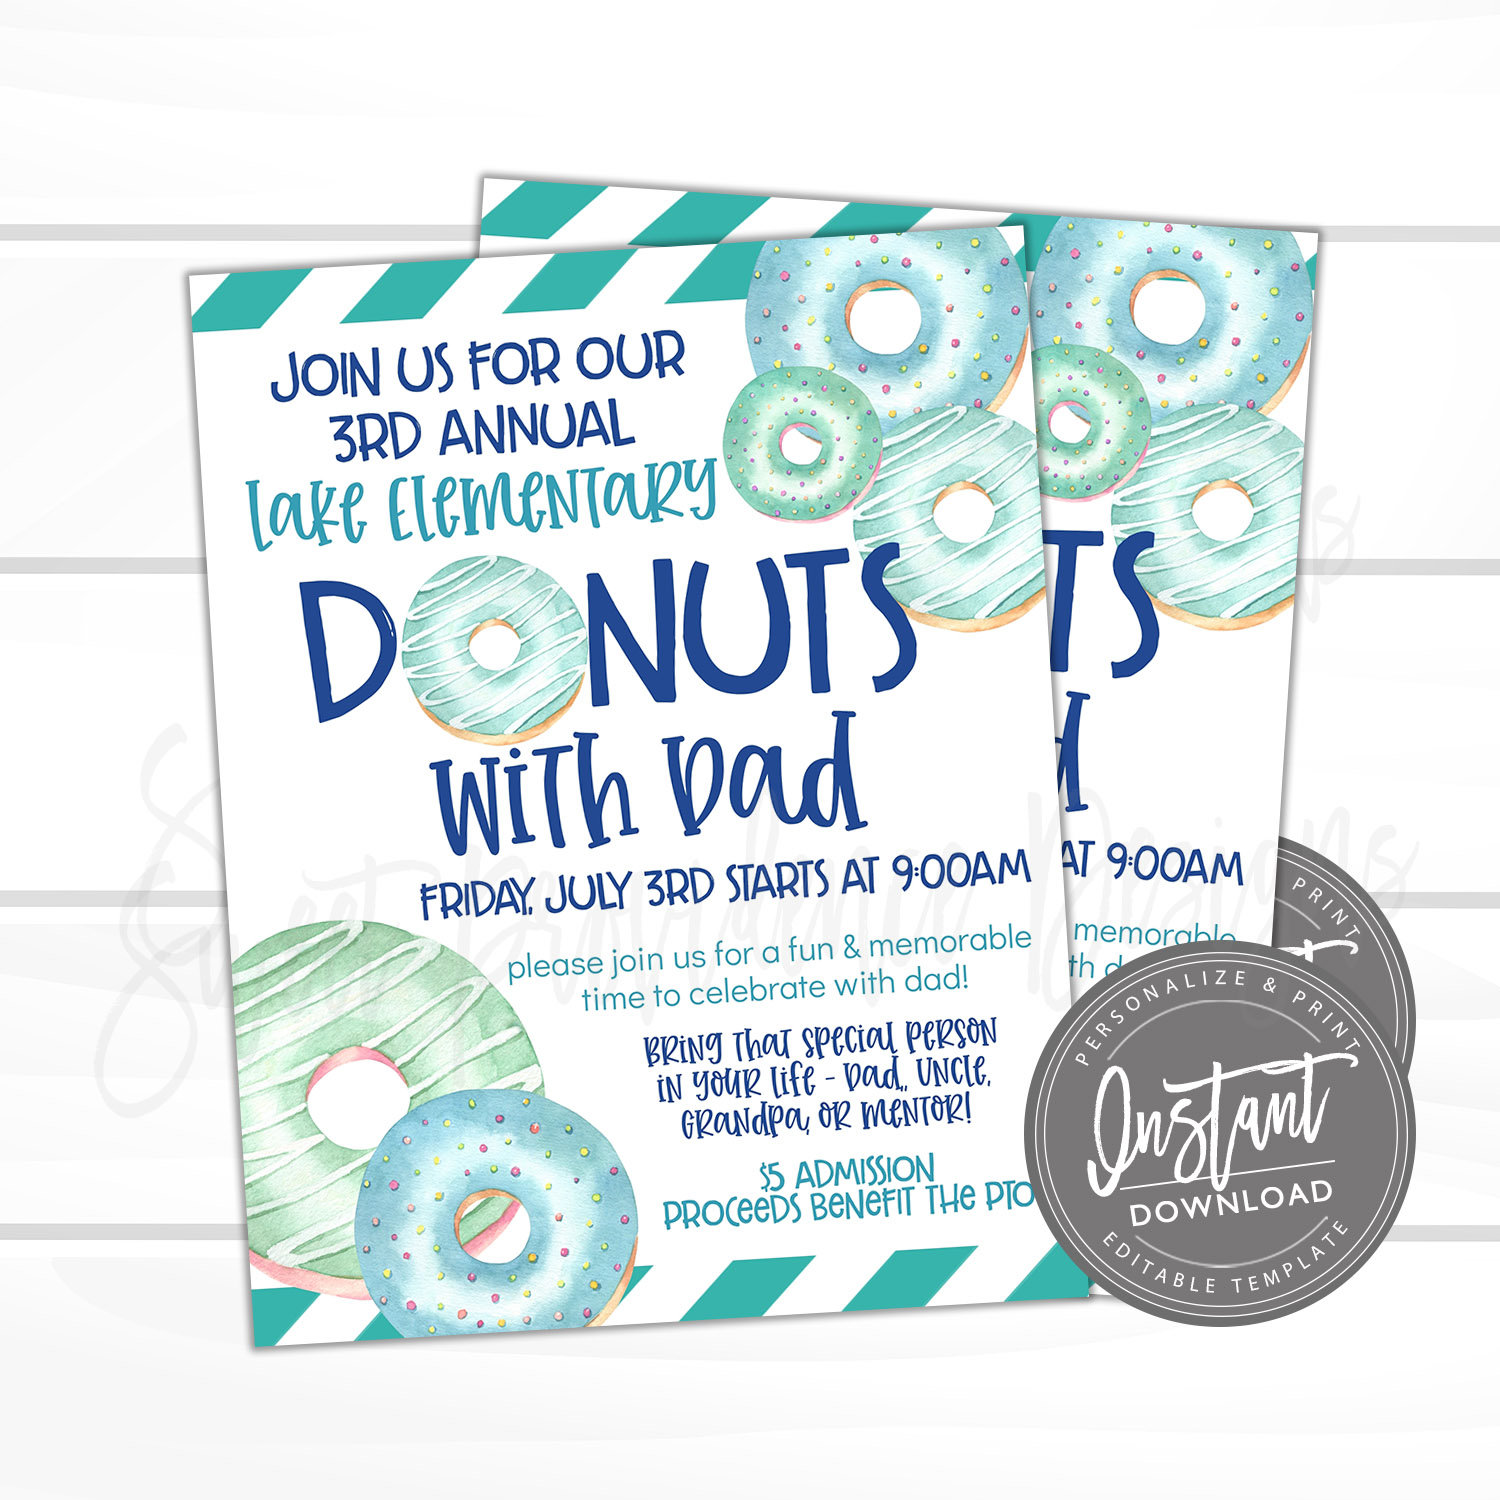 Donuts with Dad Invitation Sweet Providence Designs